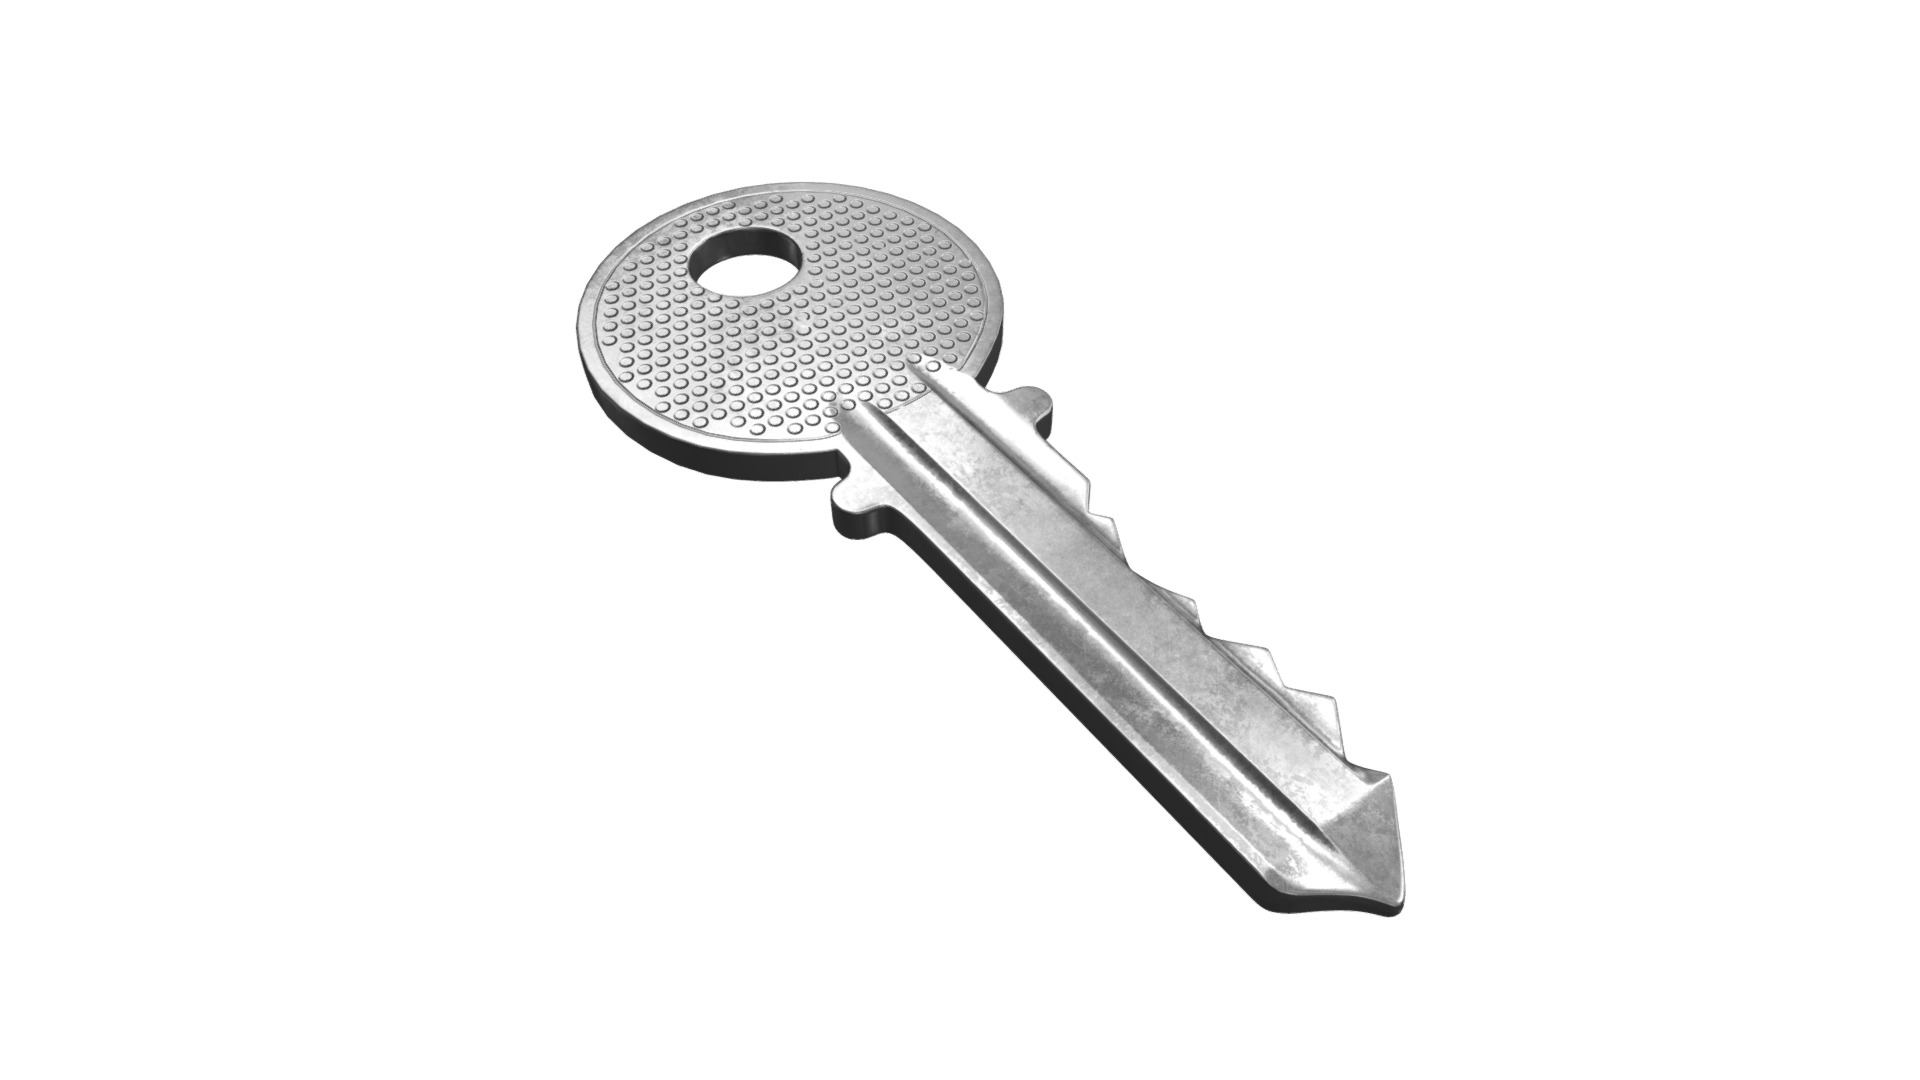 3D model Normal key - This is a 3D model of the Normal key. The 3D model is about a silver and black metal tool.